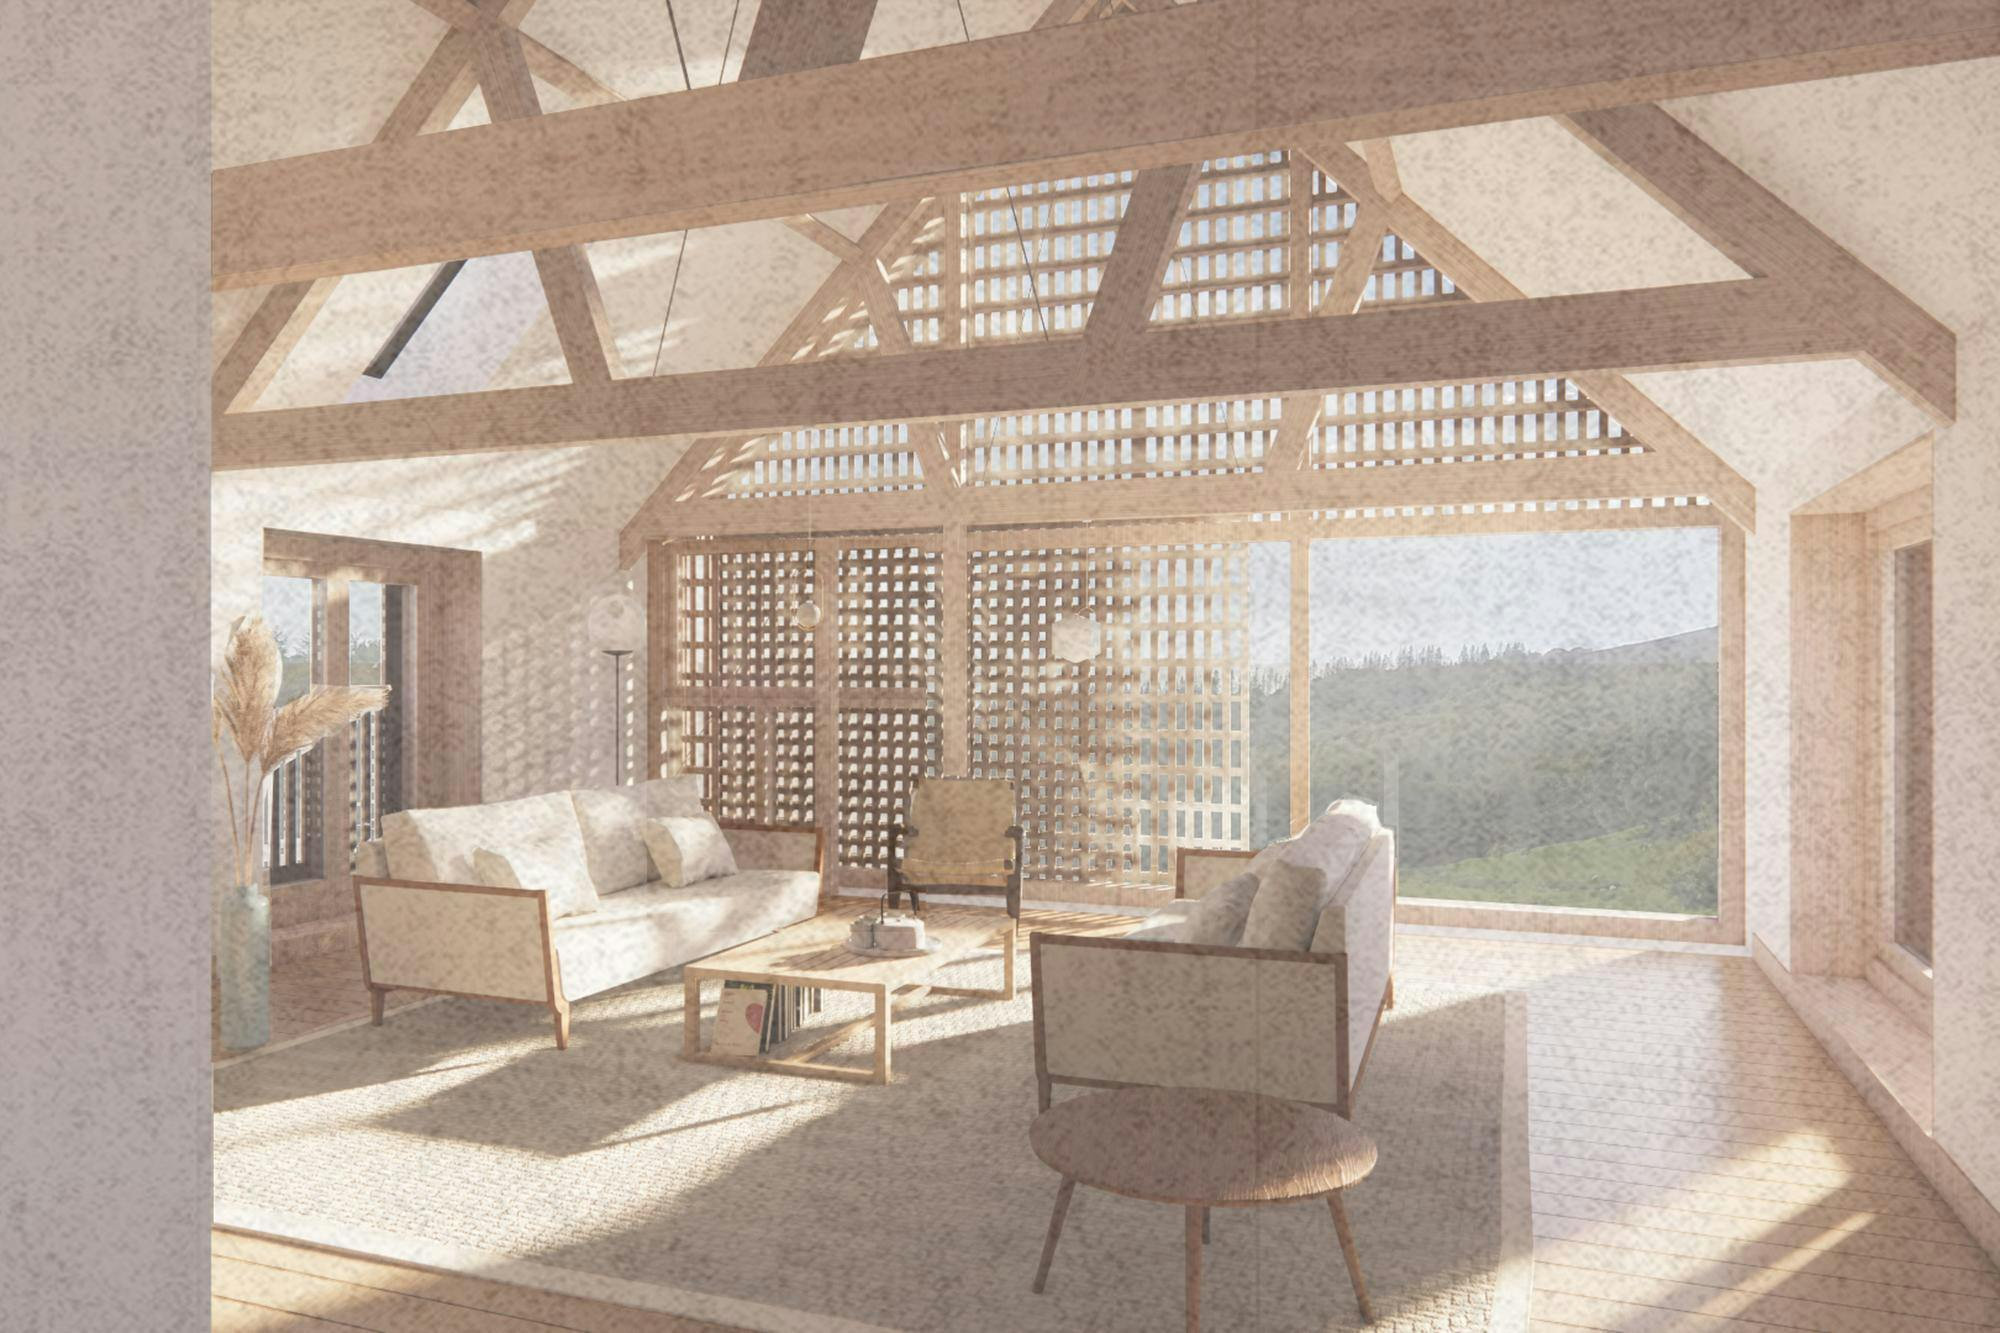 Architectural visualisation of interior living room in the Shropshire Farm